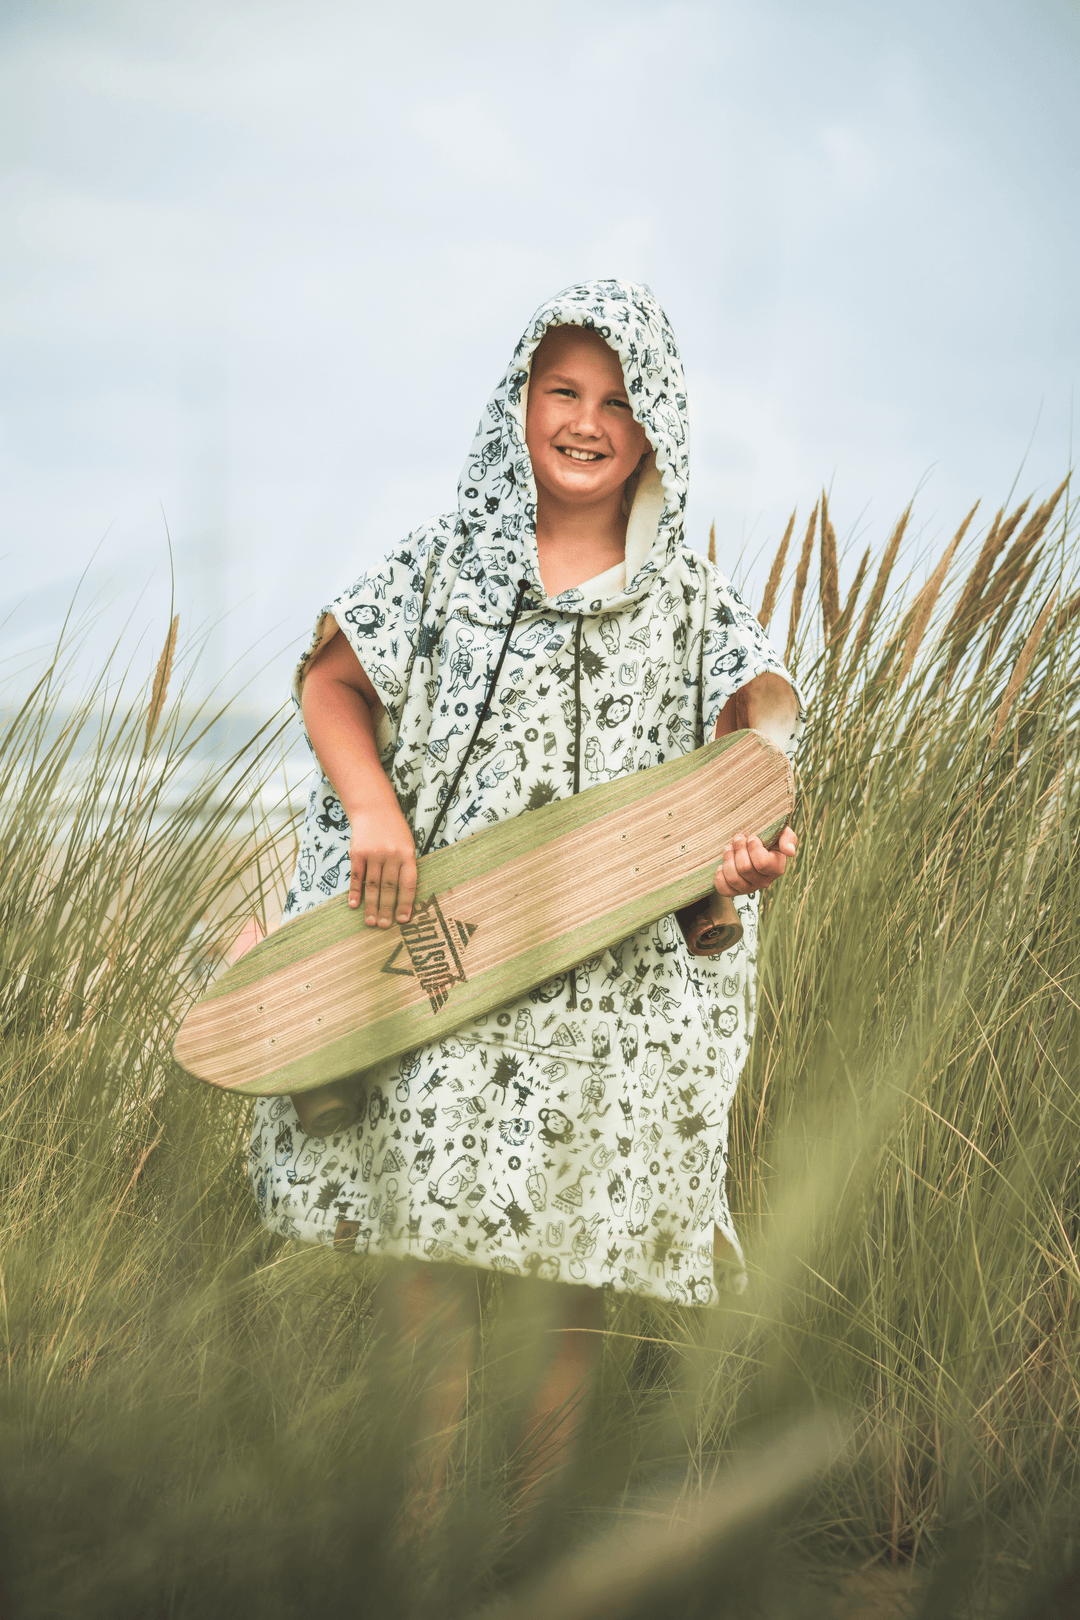 Our changing towel is essential to get warm after a workout/on the beach. Our spacious poncho allows your teenager to change clothes in private whilst giving them that popular rebel look with our PUNK design. A soft two-toned poncho loaded with some neat sketches.